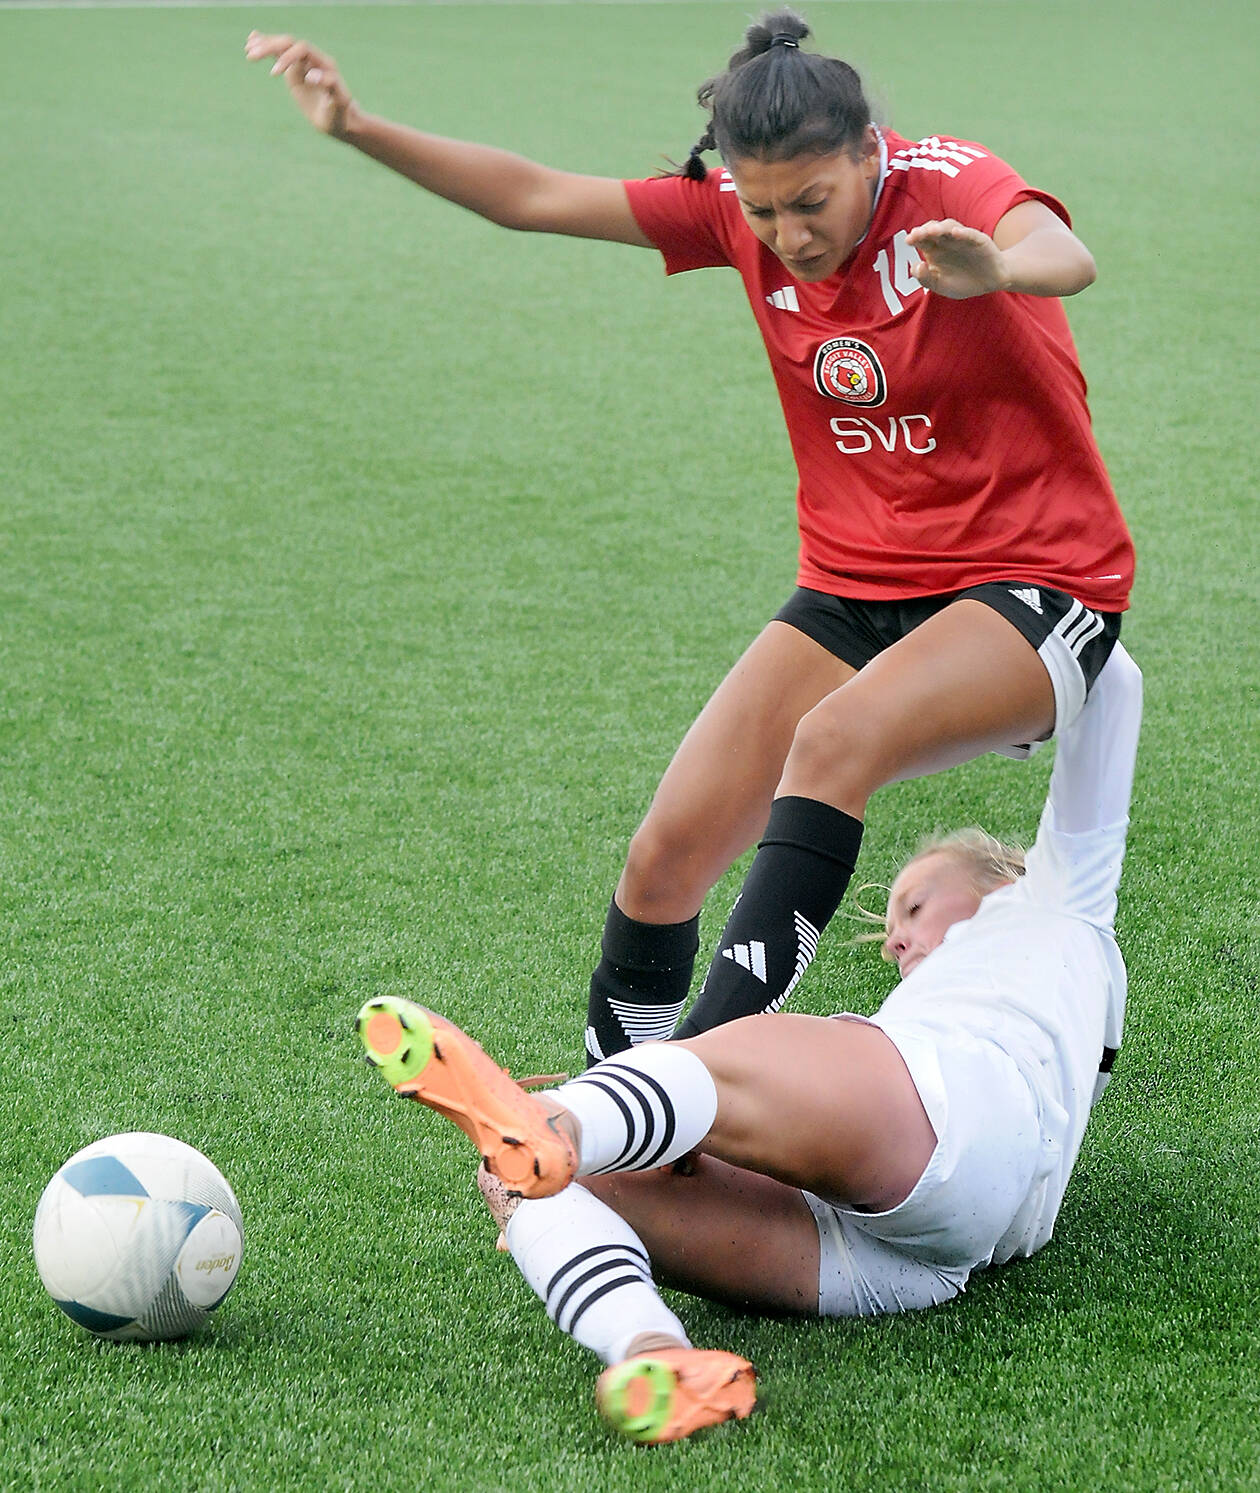 KEITH THORPE/PENINSULA DAILY NEWS 
Peninsula’s Anna Petty, bottom, makes a sliding tackle on Skagit Valley’s Liz Cisneros during Wednesday’s match at Peninsula College.